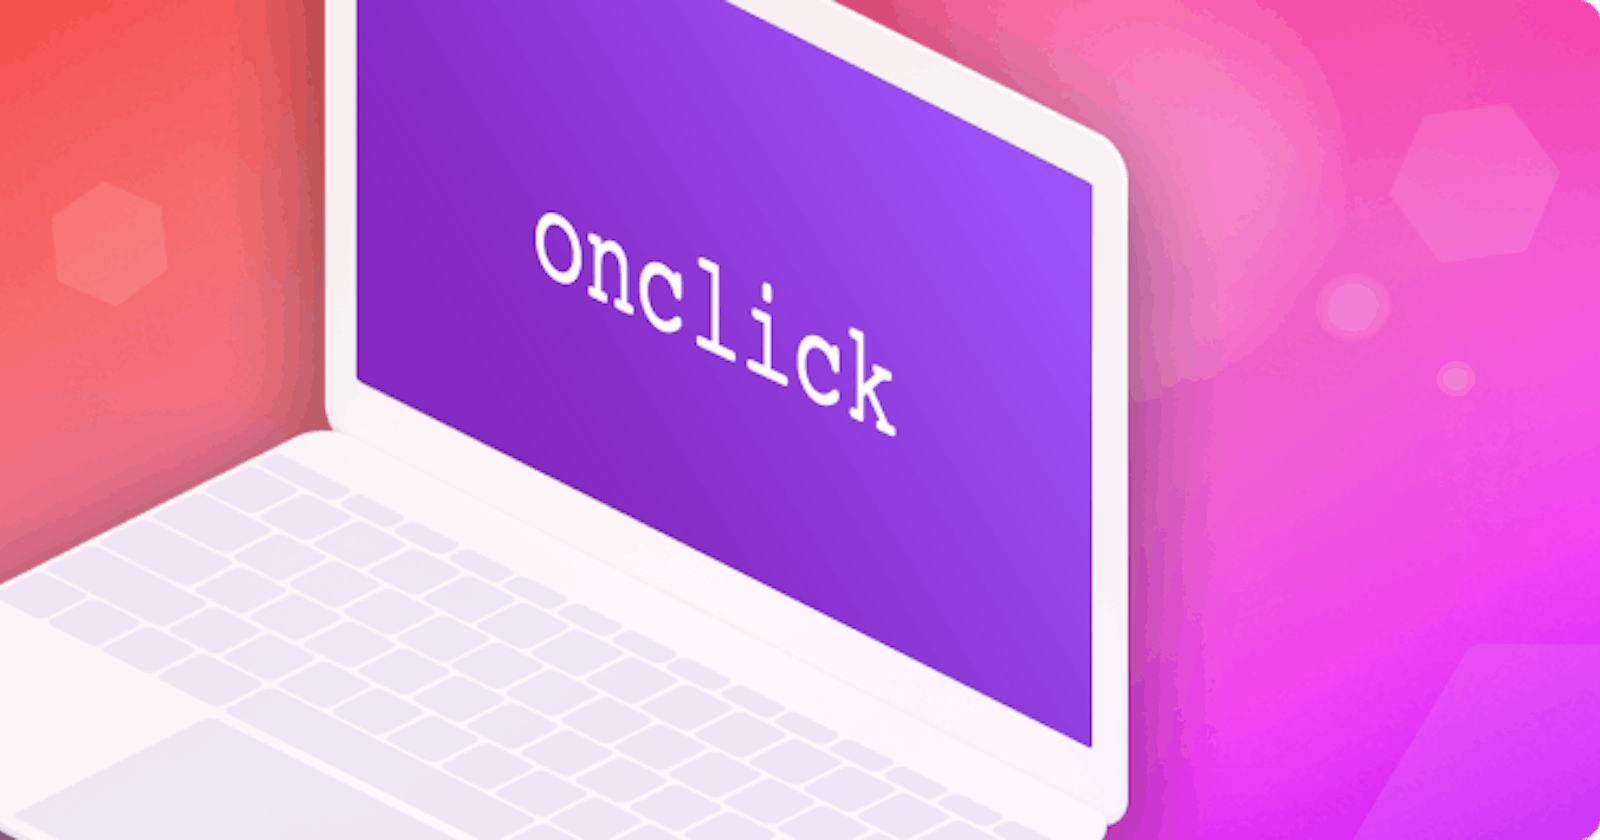 onclick event in JavaScript